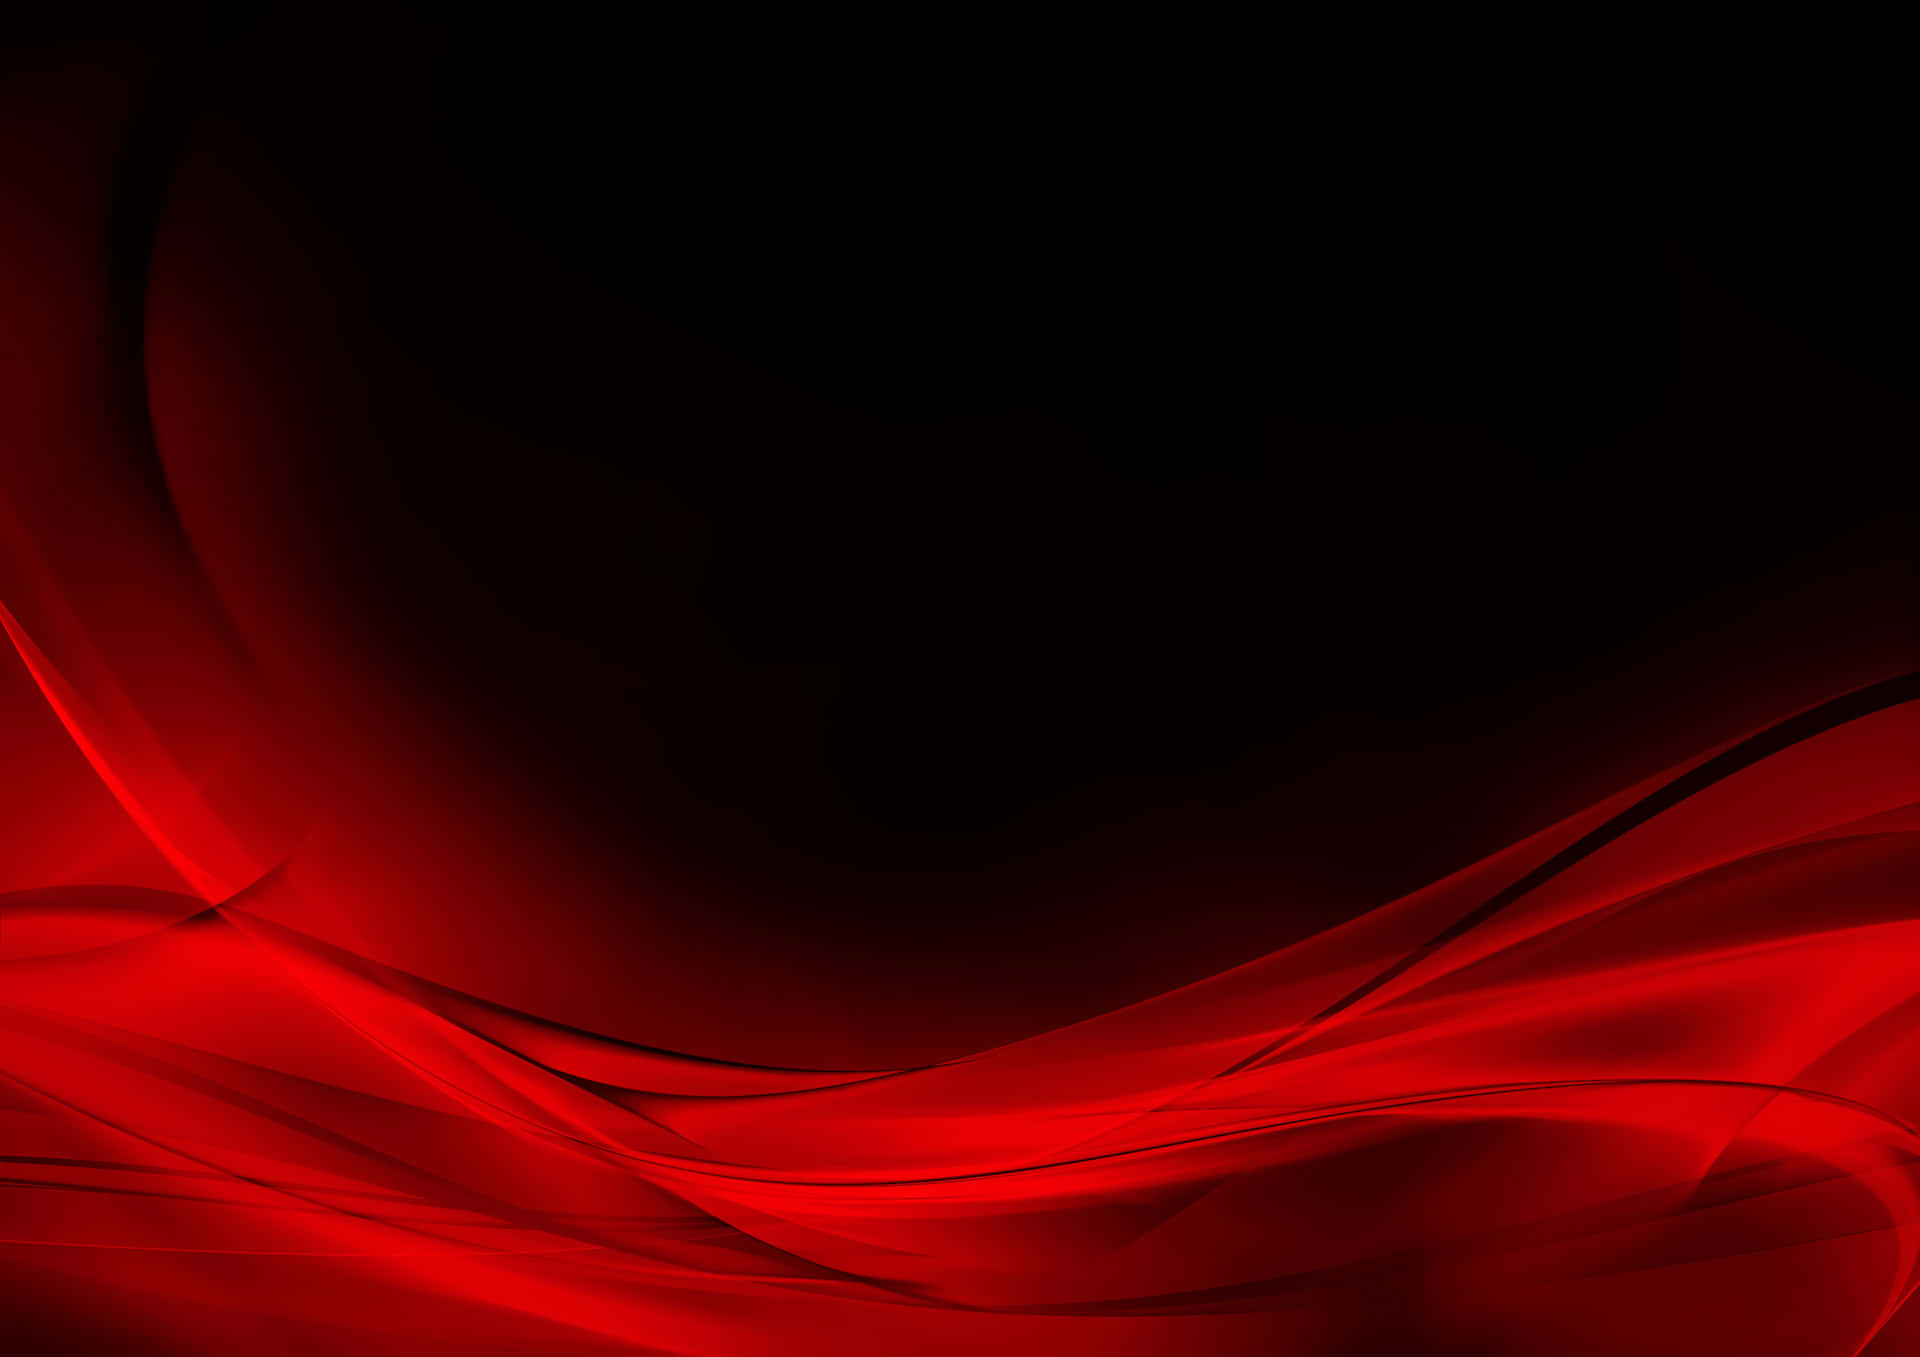 Bright Red And Black Coloring Pattern on 1080p Background